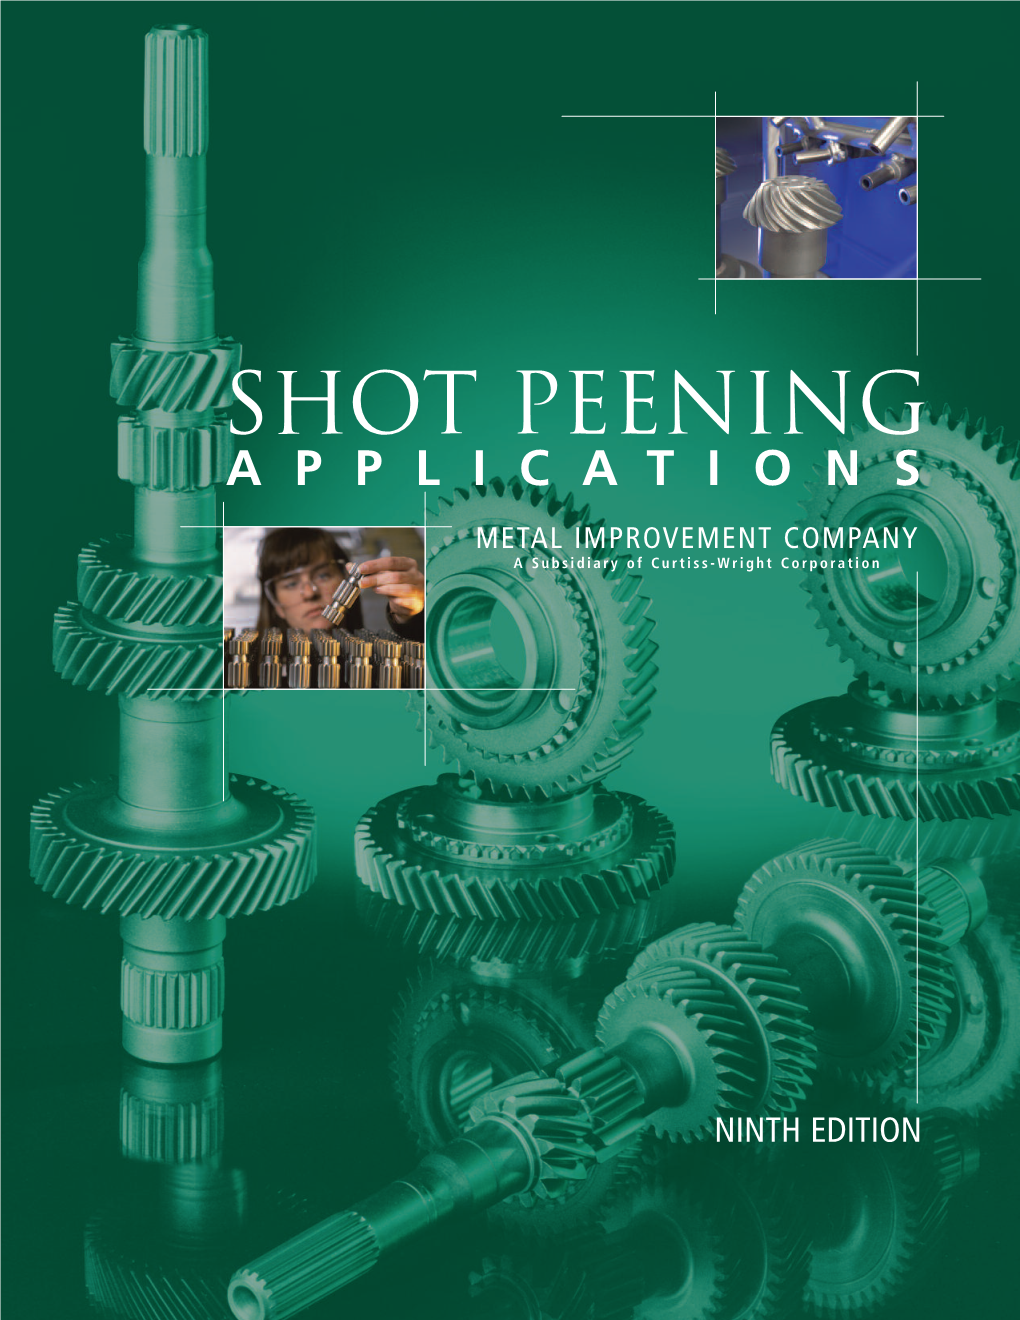 Shot Peening APPLICATIONS METAL IMPROVEMENT COMPANY a Subsidiary of Curtiss-Wright Corporation